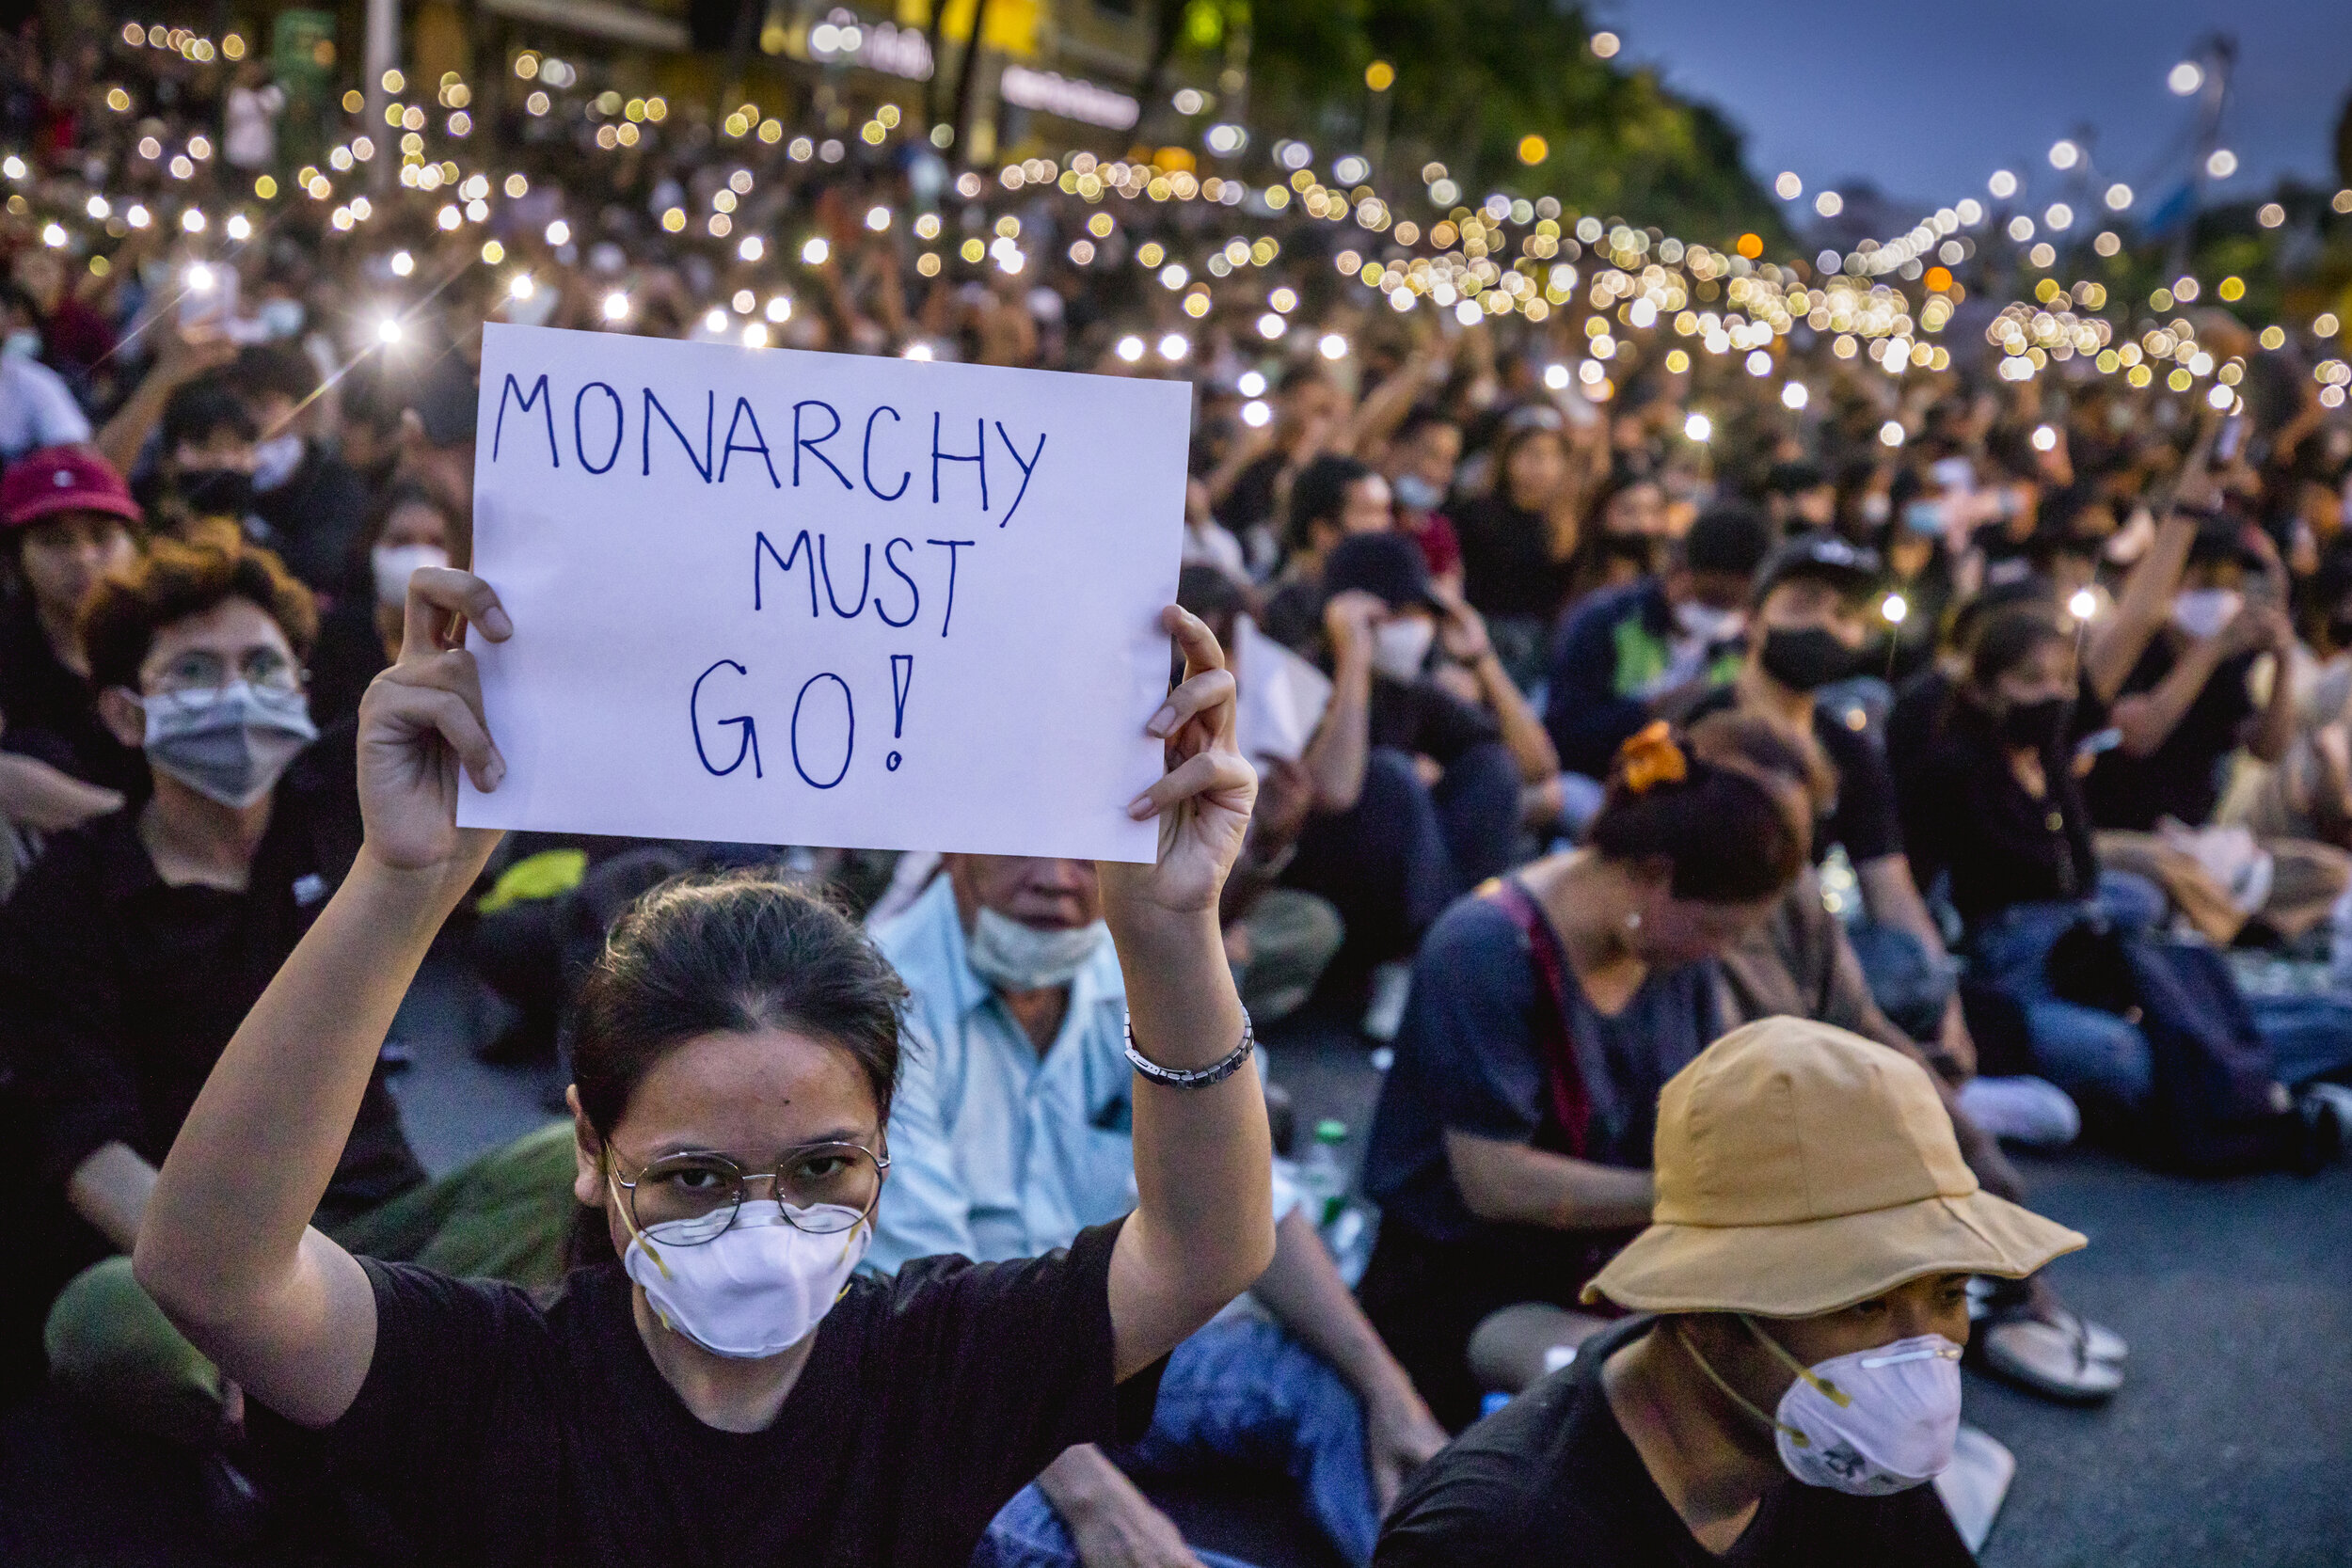  A protester holds up a sign with criticism against the monarchy under a protest in Bangkok/ Thailand- 2020 